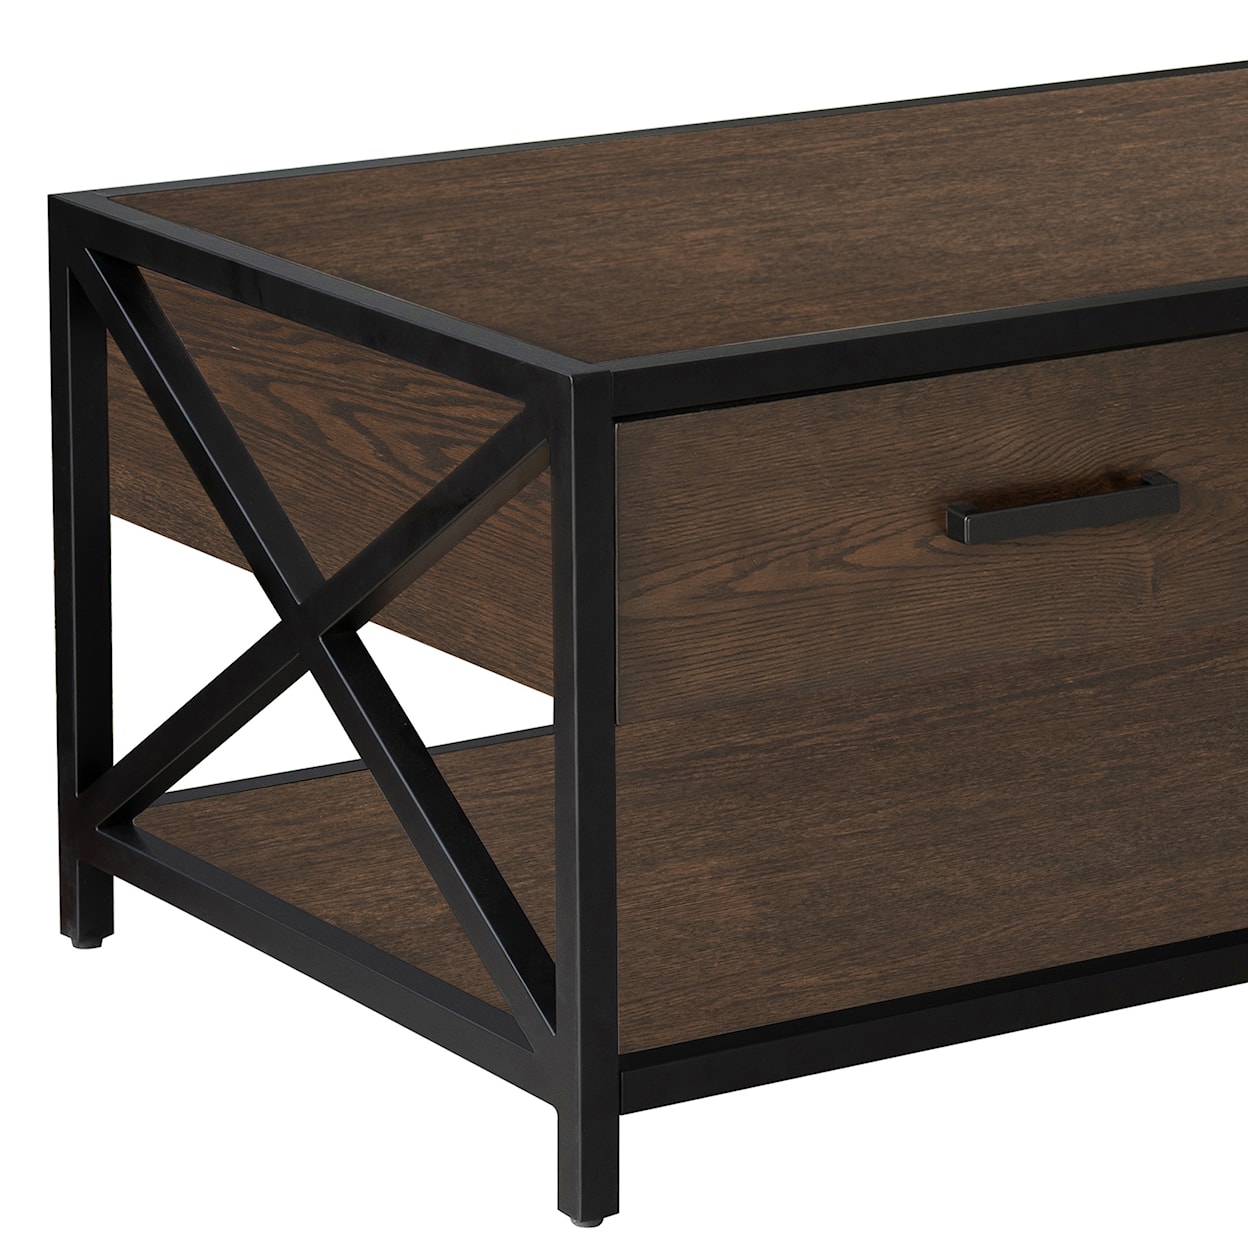 Accentrics Home Accents Metal Framed Two Drawer Cocktail Table